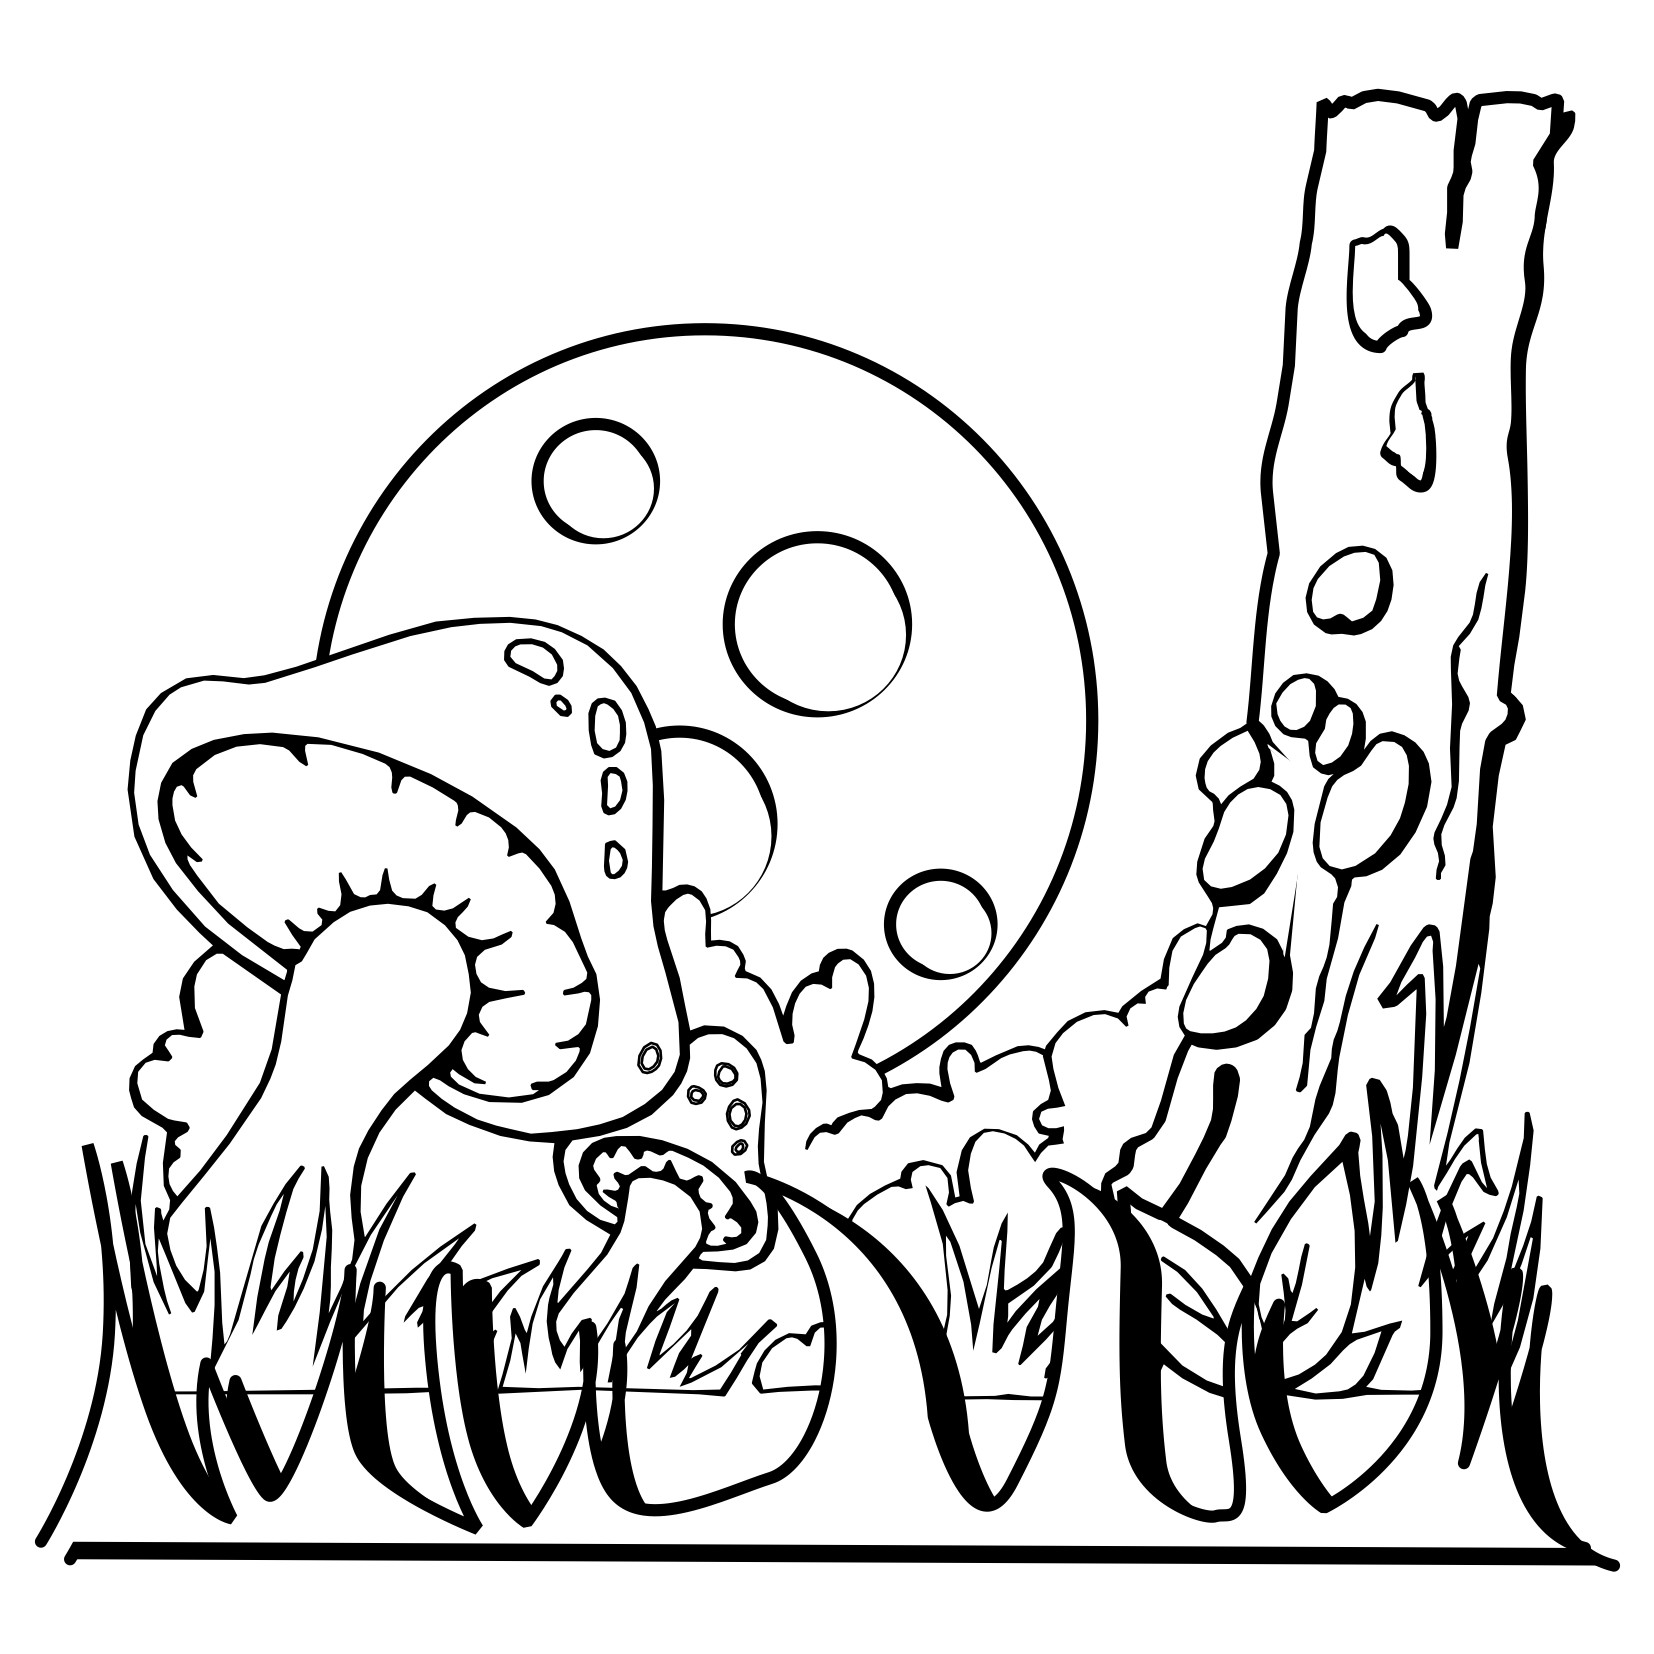 Coloring Pages For Kids For Free
 Fantasy Coloring Pages Best Coloring Pages For Kids